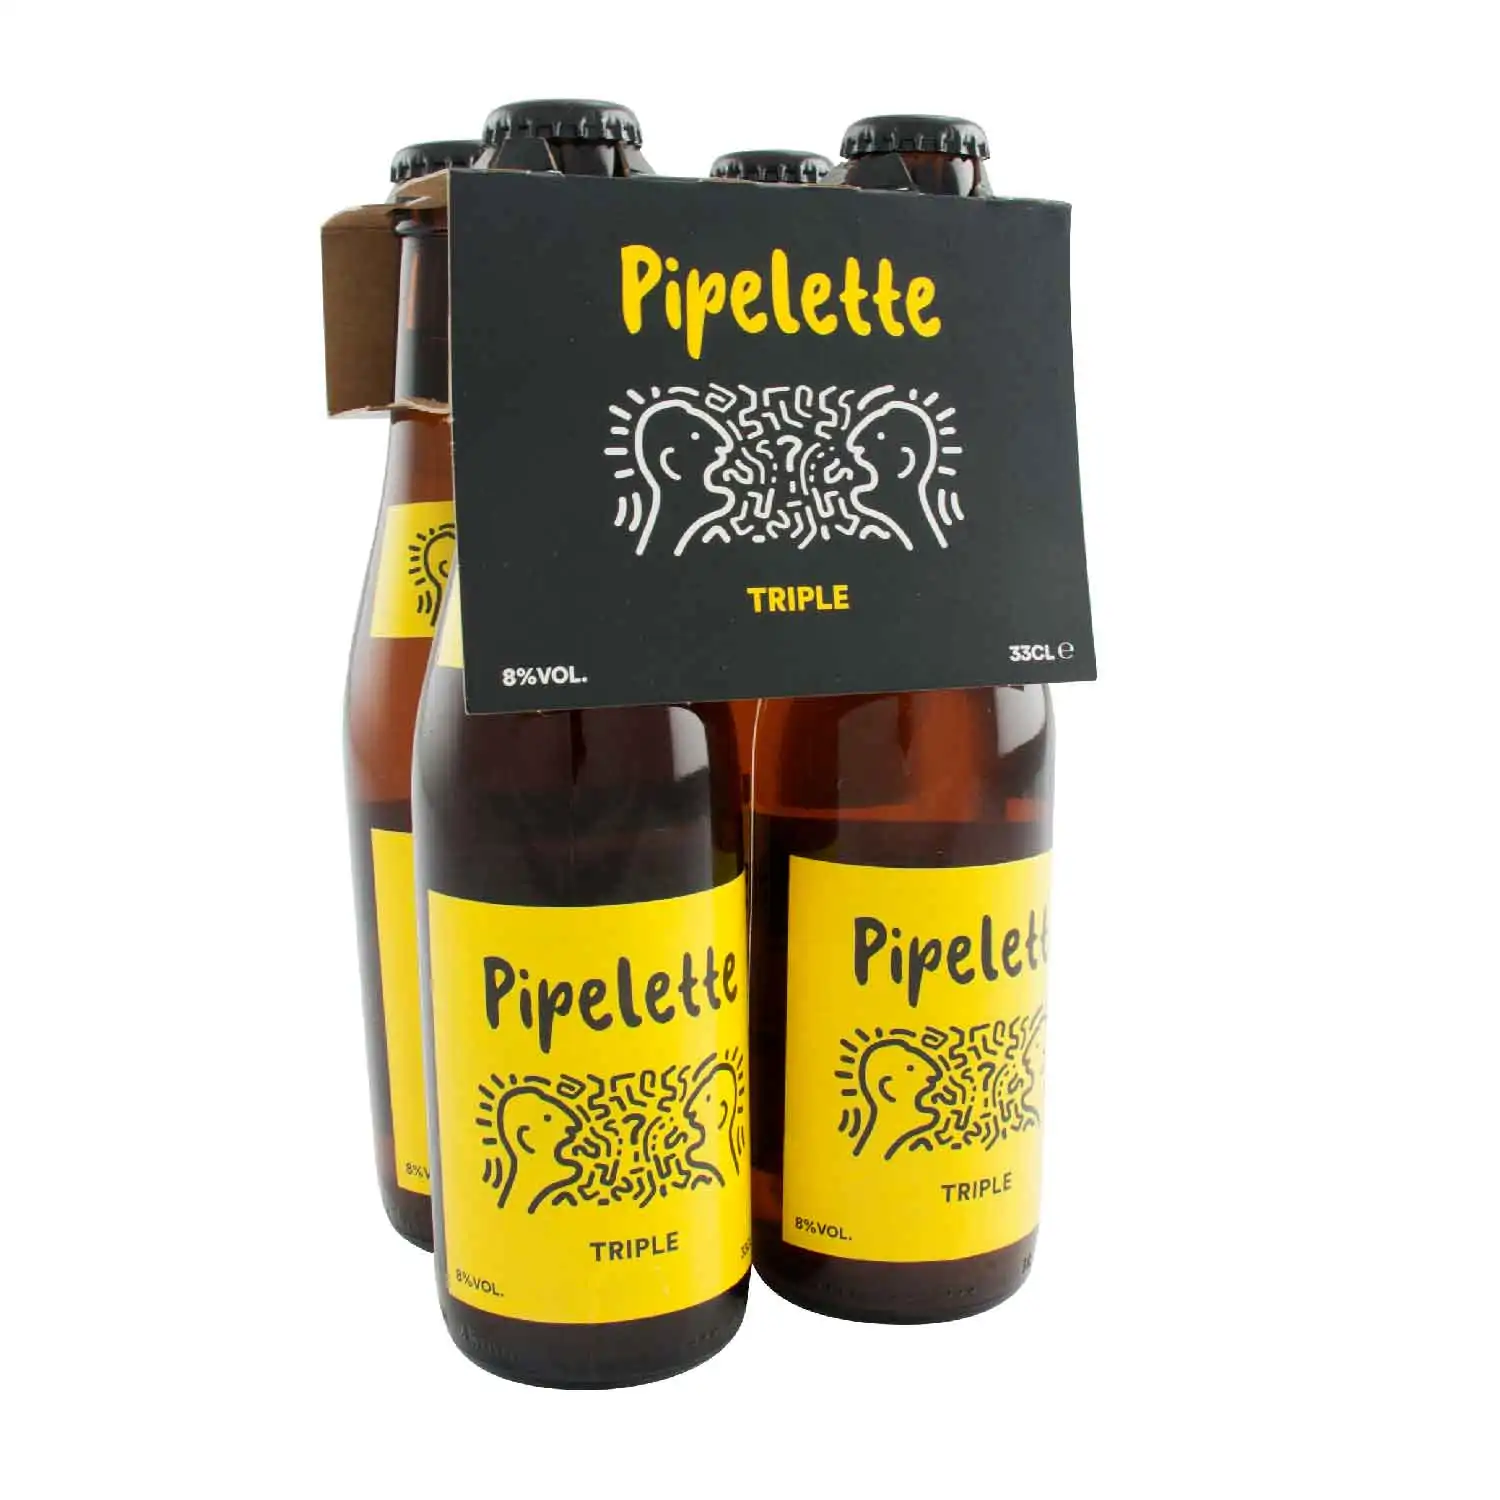 4x Pipelette triple 33cl Alc 8% - Buy at Real Tobacco